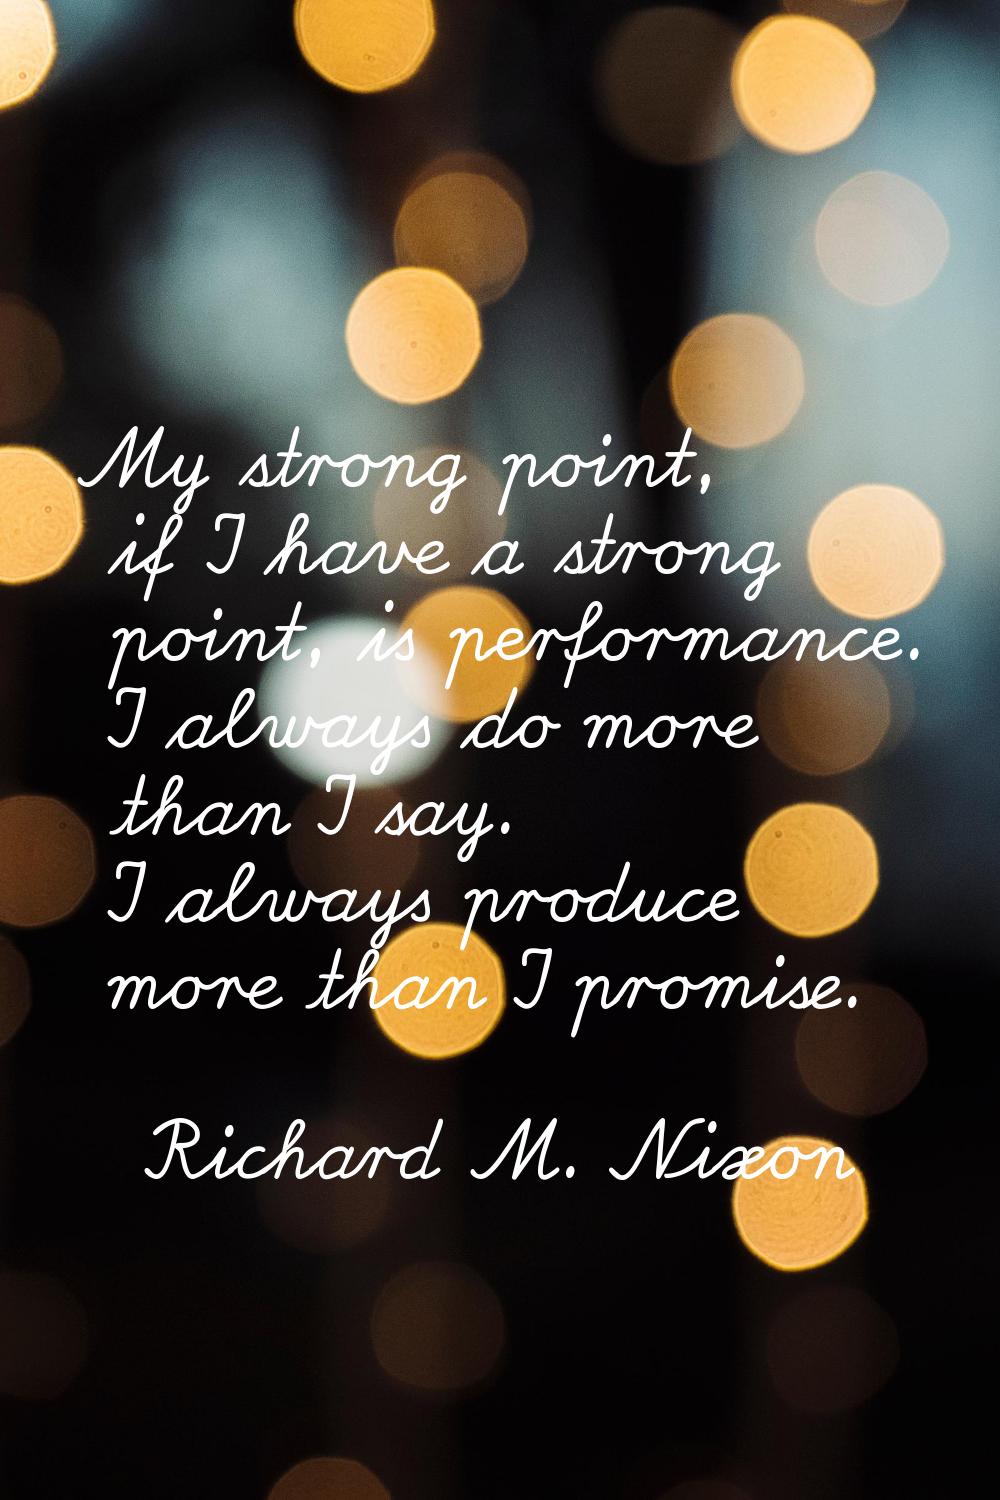 My strong point, if I have a strong point, is performance. I always do more than I say. I always pr